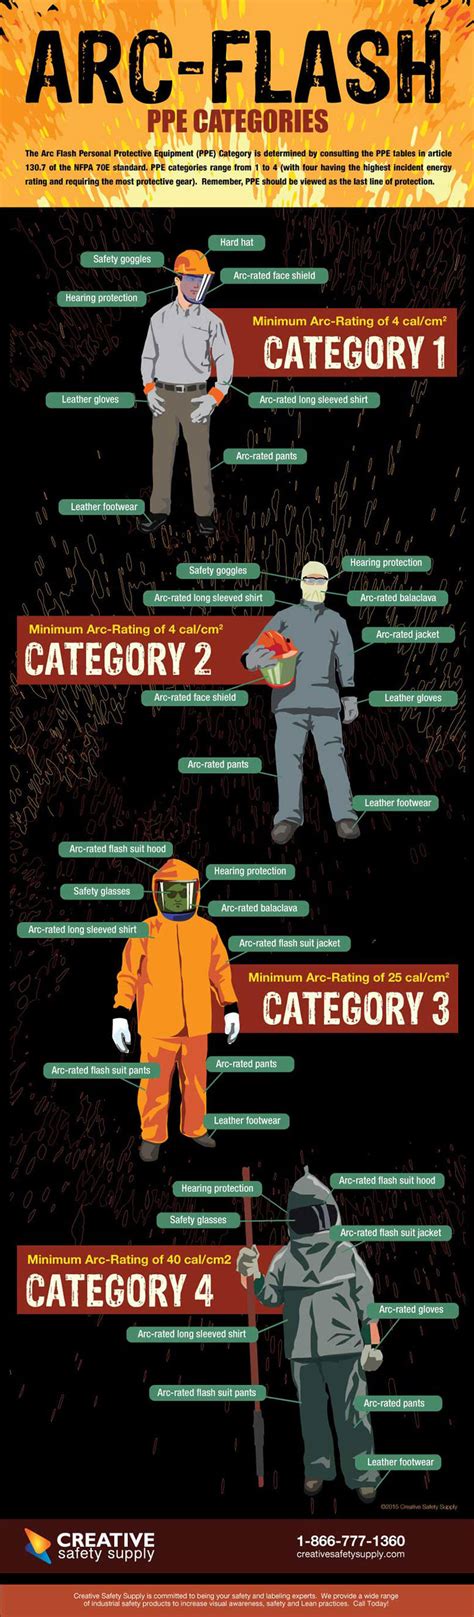 infographic arc flash ppe categories creative safety supply